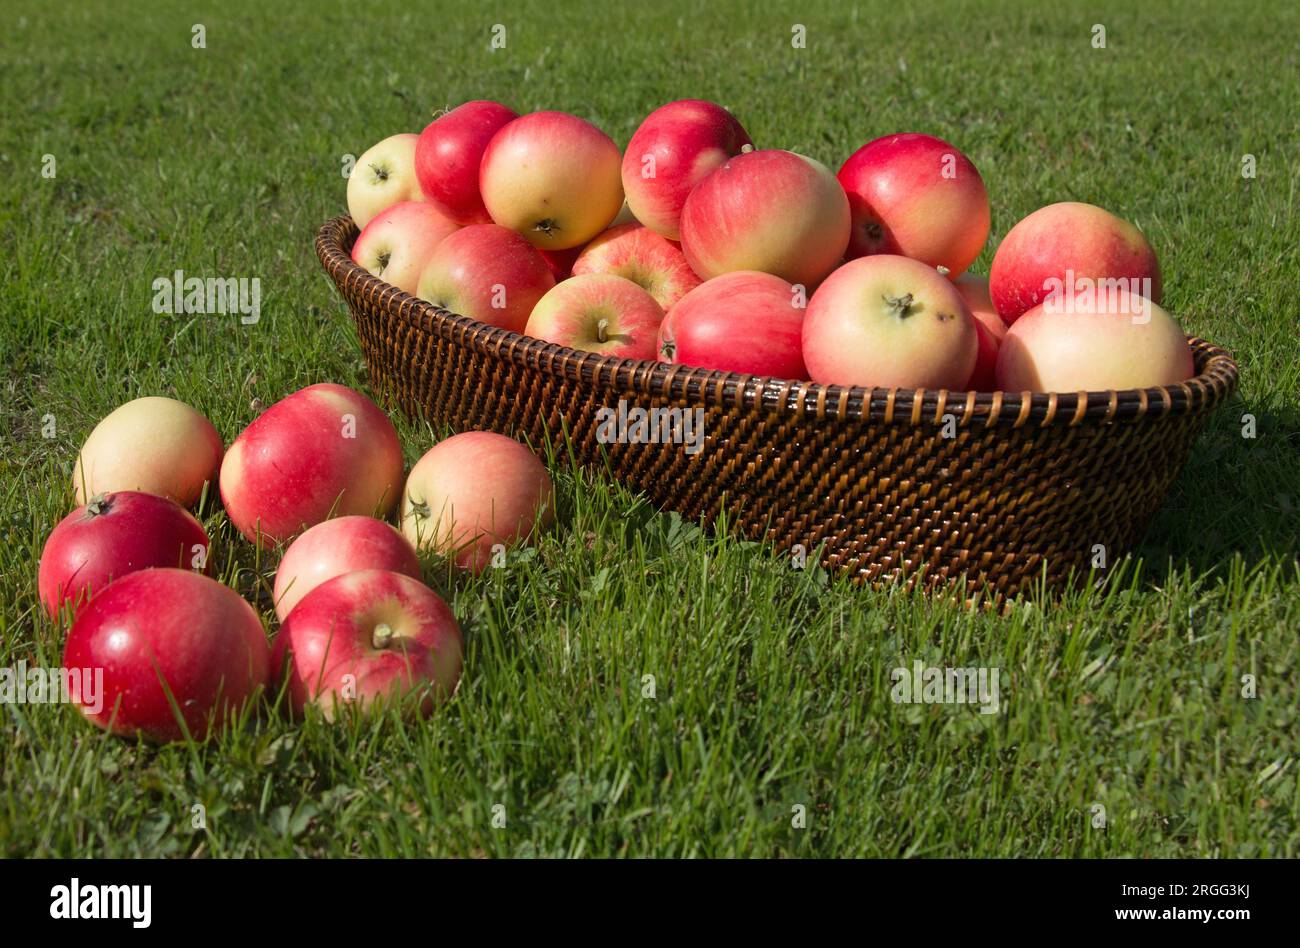 A summer harvest of freshly picked ripe red Discovery eating apples, Malus domestica, in a wicker basket on green grass, side view Stock Photo